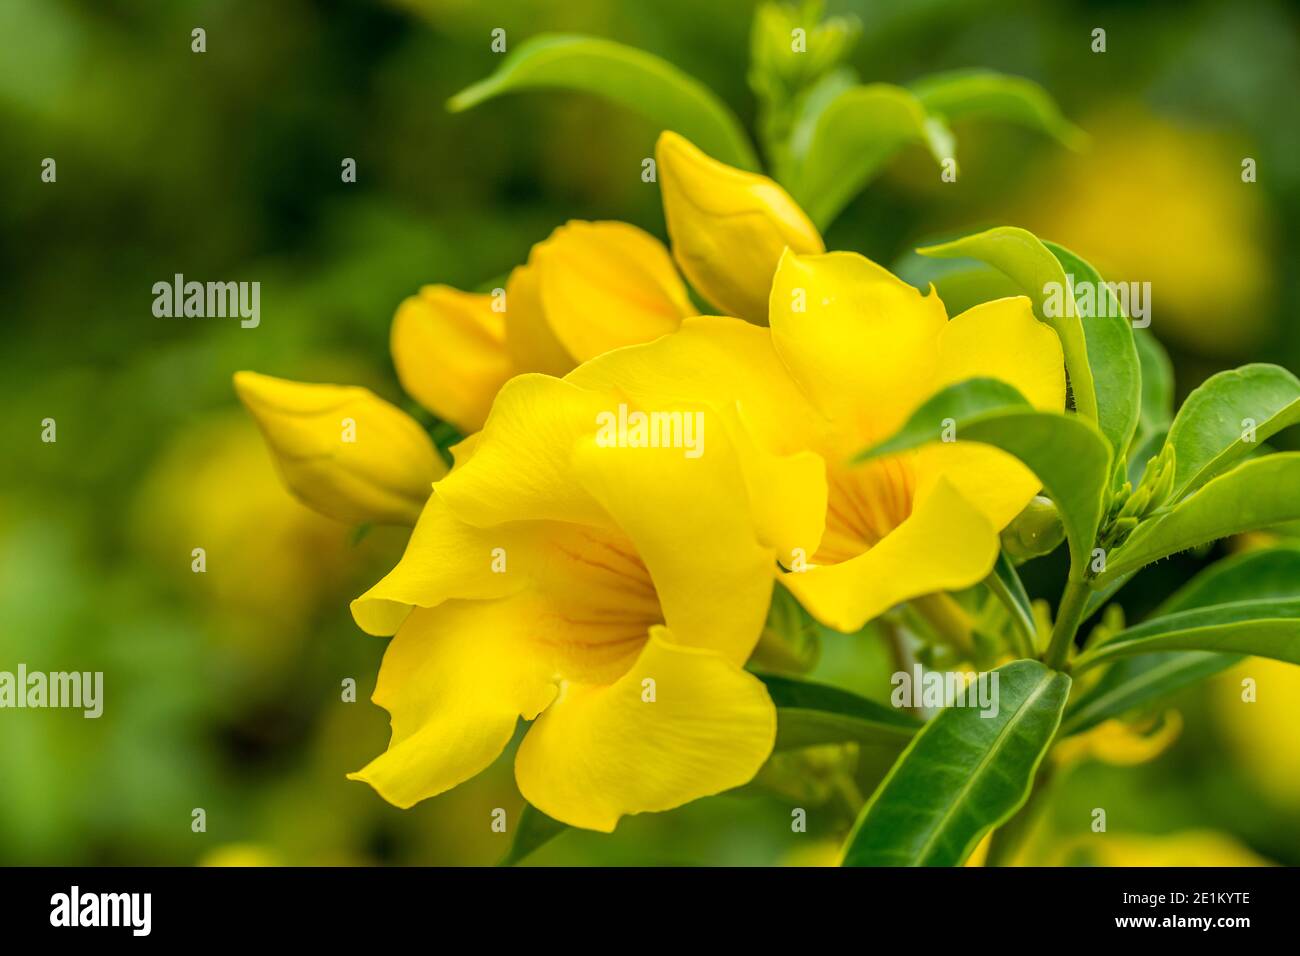 A group of Allamanda cathartica, also called golden trumpet flower, a species of flowering plant of the genus Allamanda in the family Apocynaceae Stock Photo